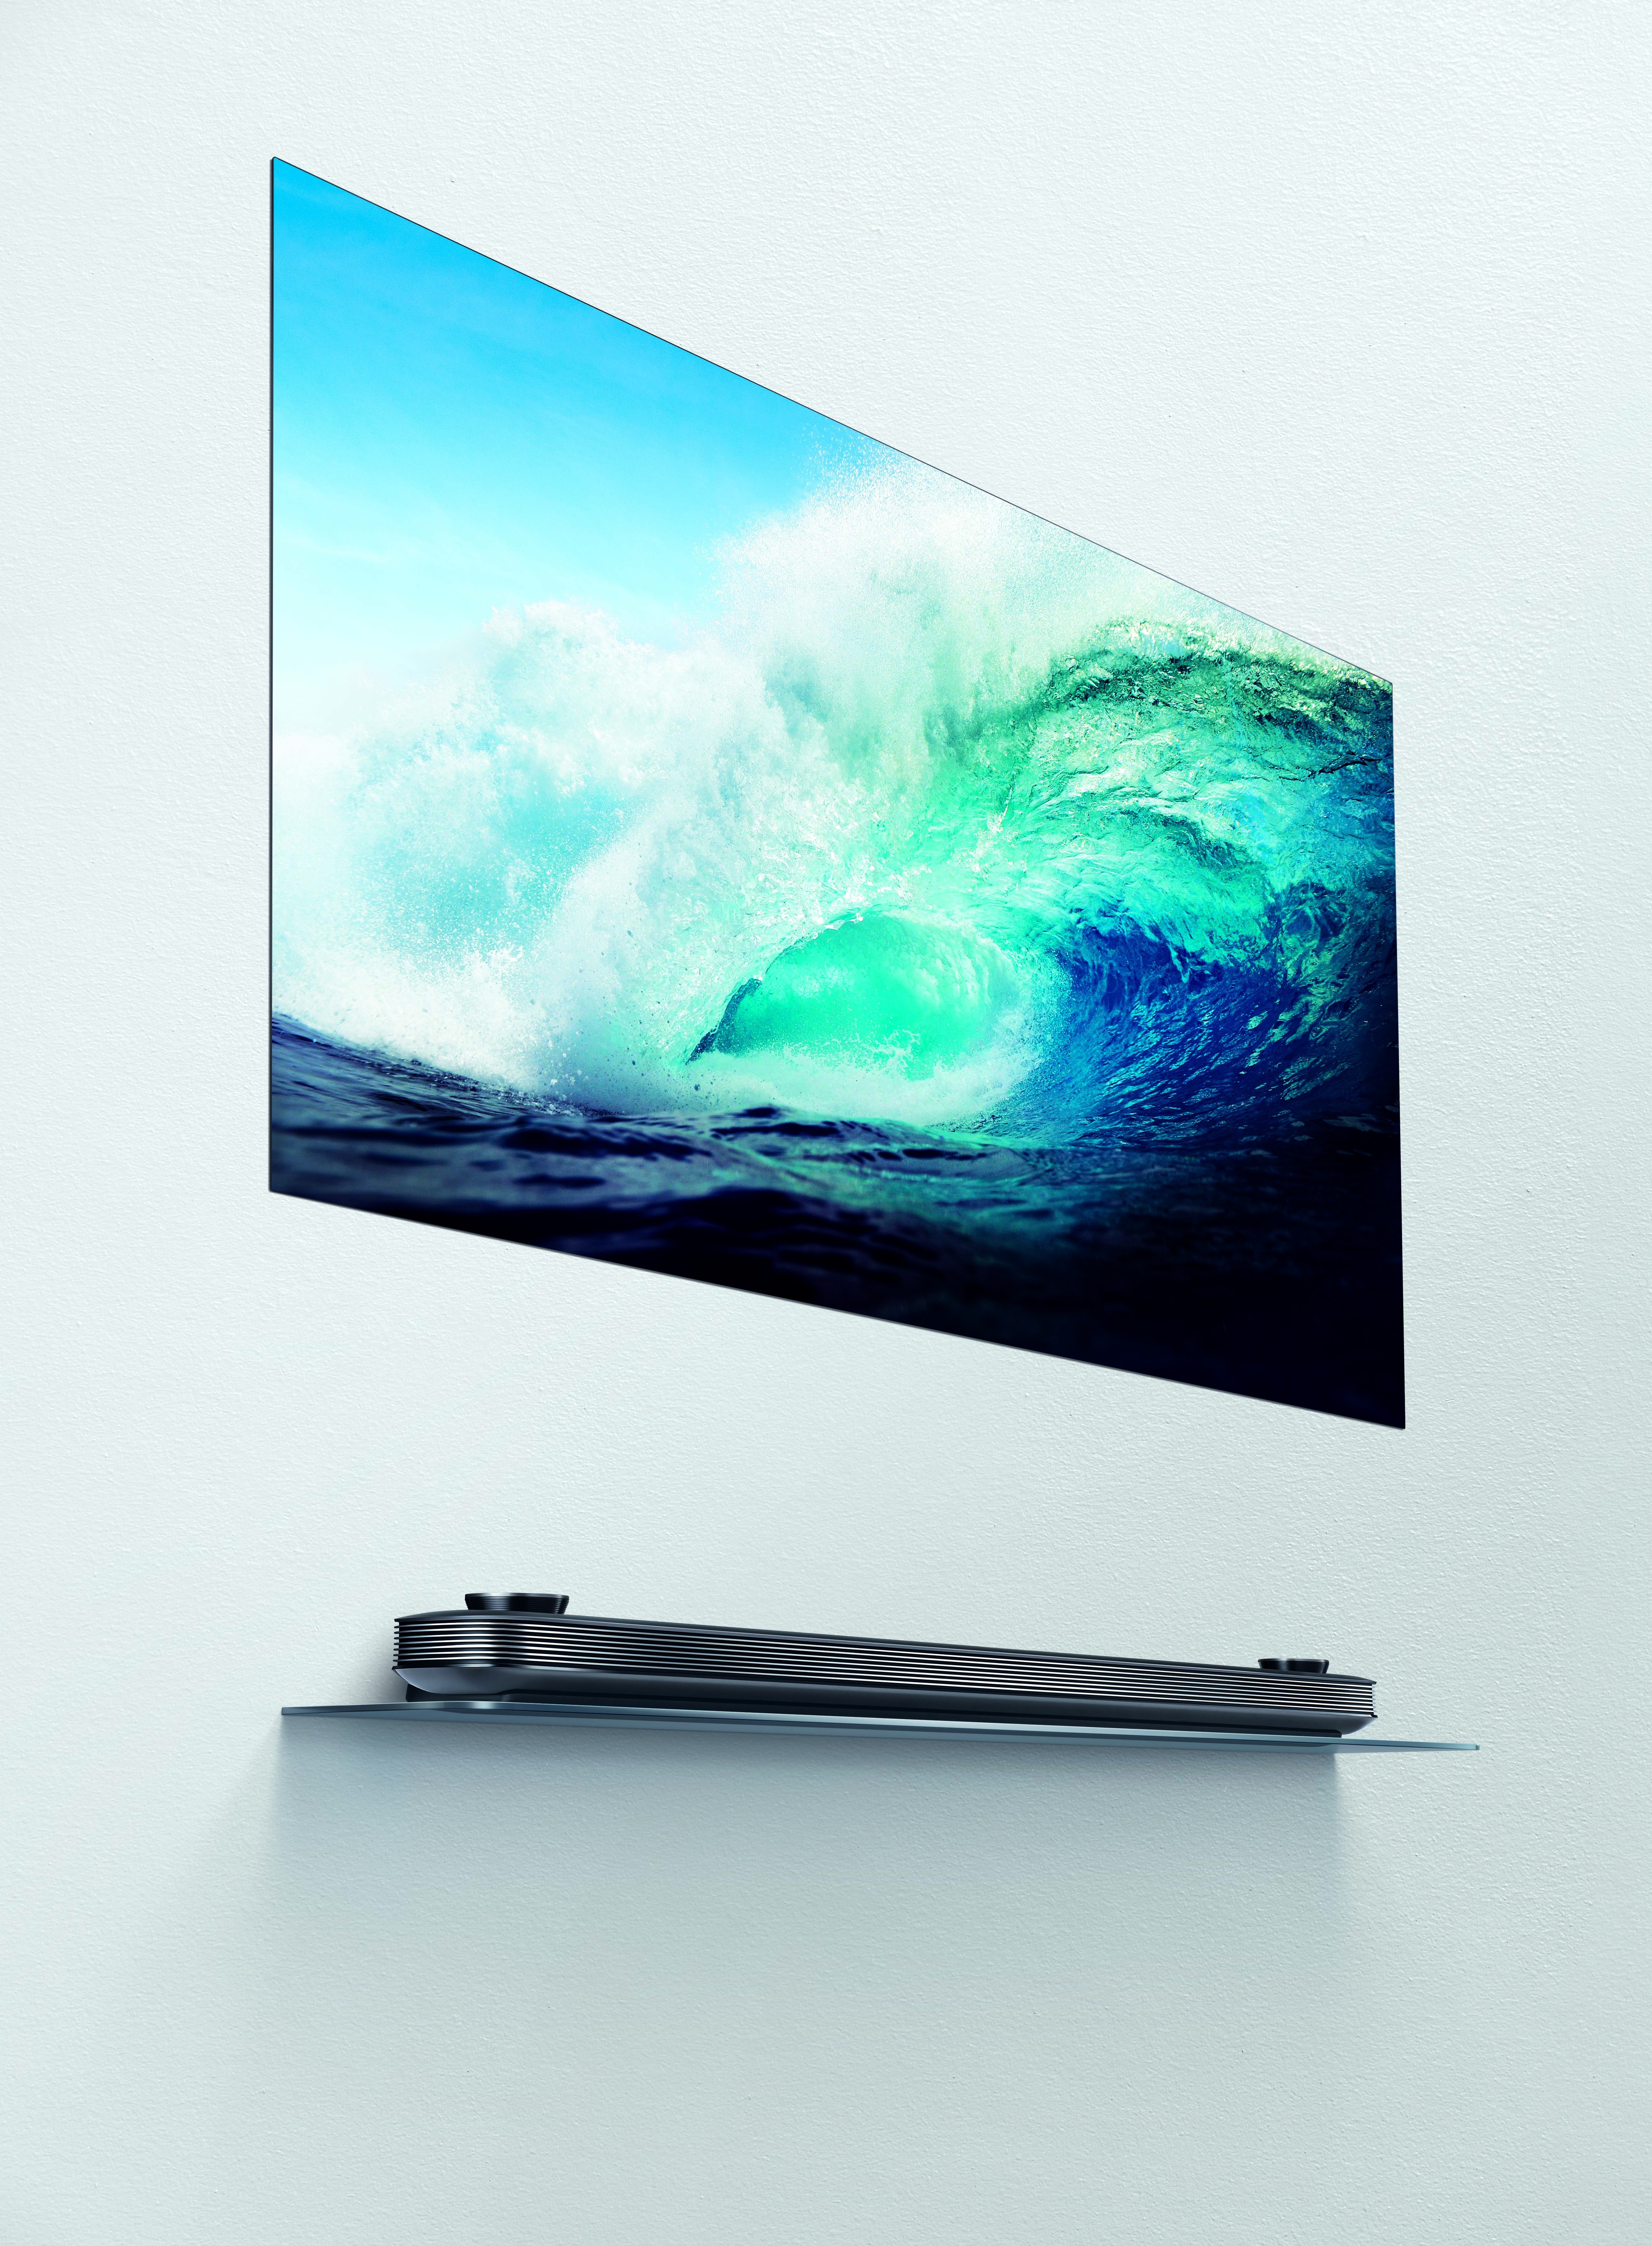 LG OLED AND LG SUPER UHD TVS RATED AS TOP PERFOMERS BY LEADING CONSUMER ...